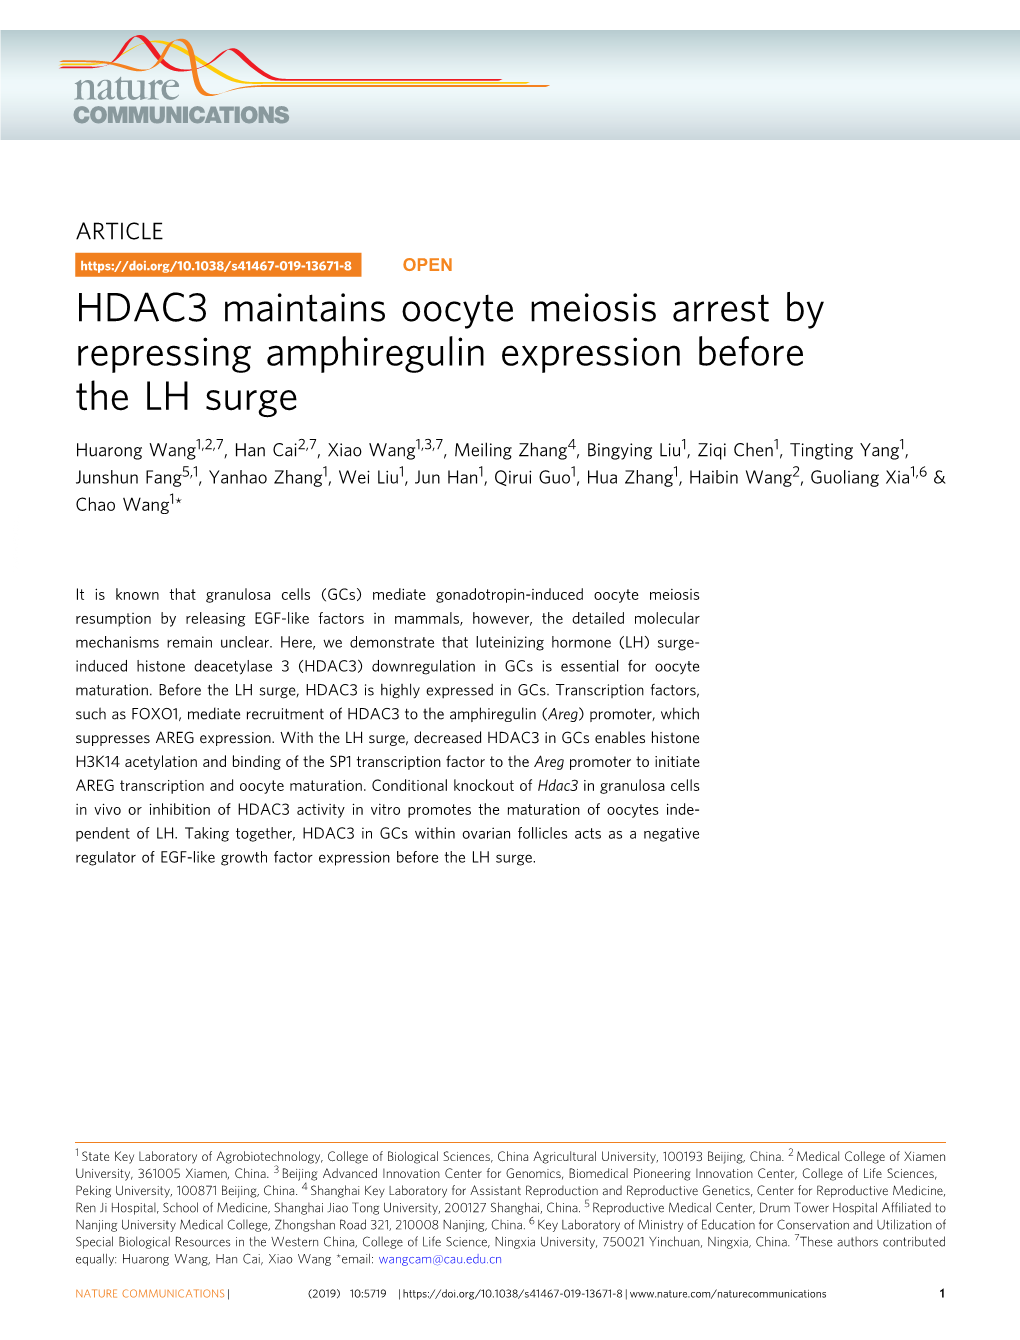 HDAC3 Maintains Oocyte Meiosis Arrest by Repressing Amphiregulin Expression Before the LH Surge